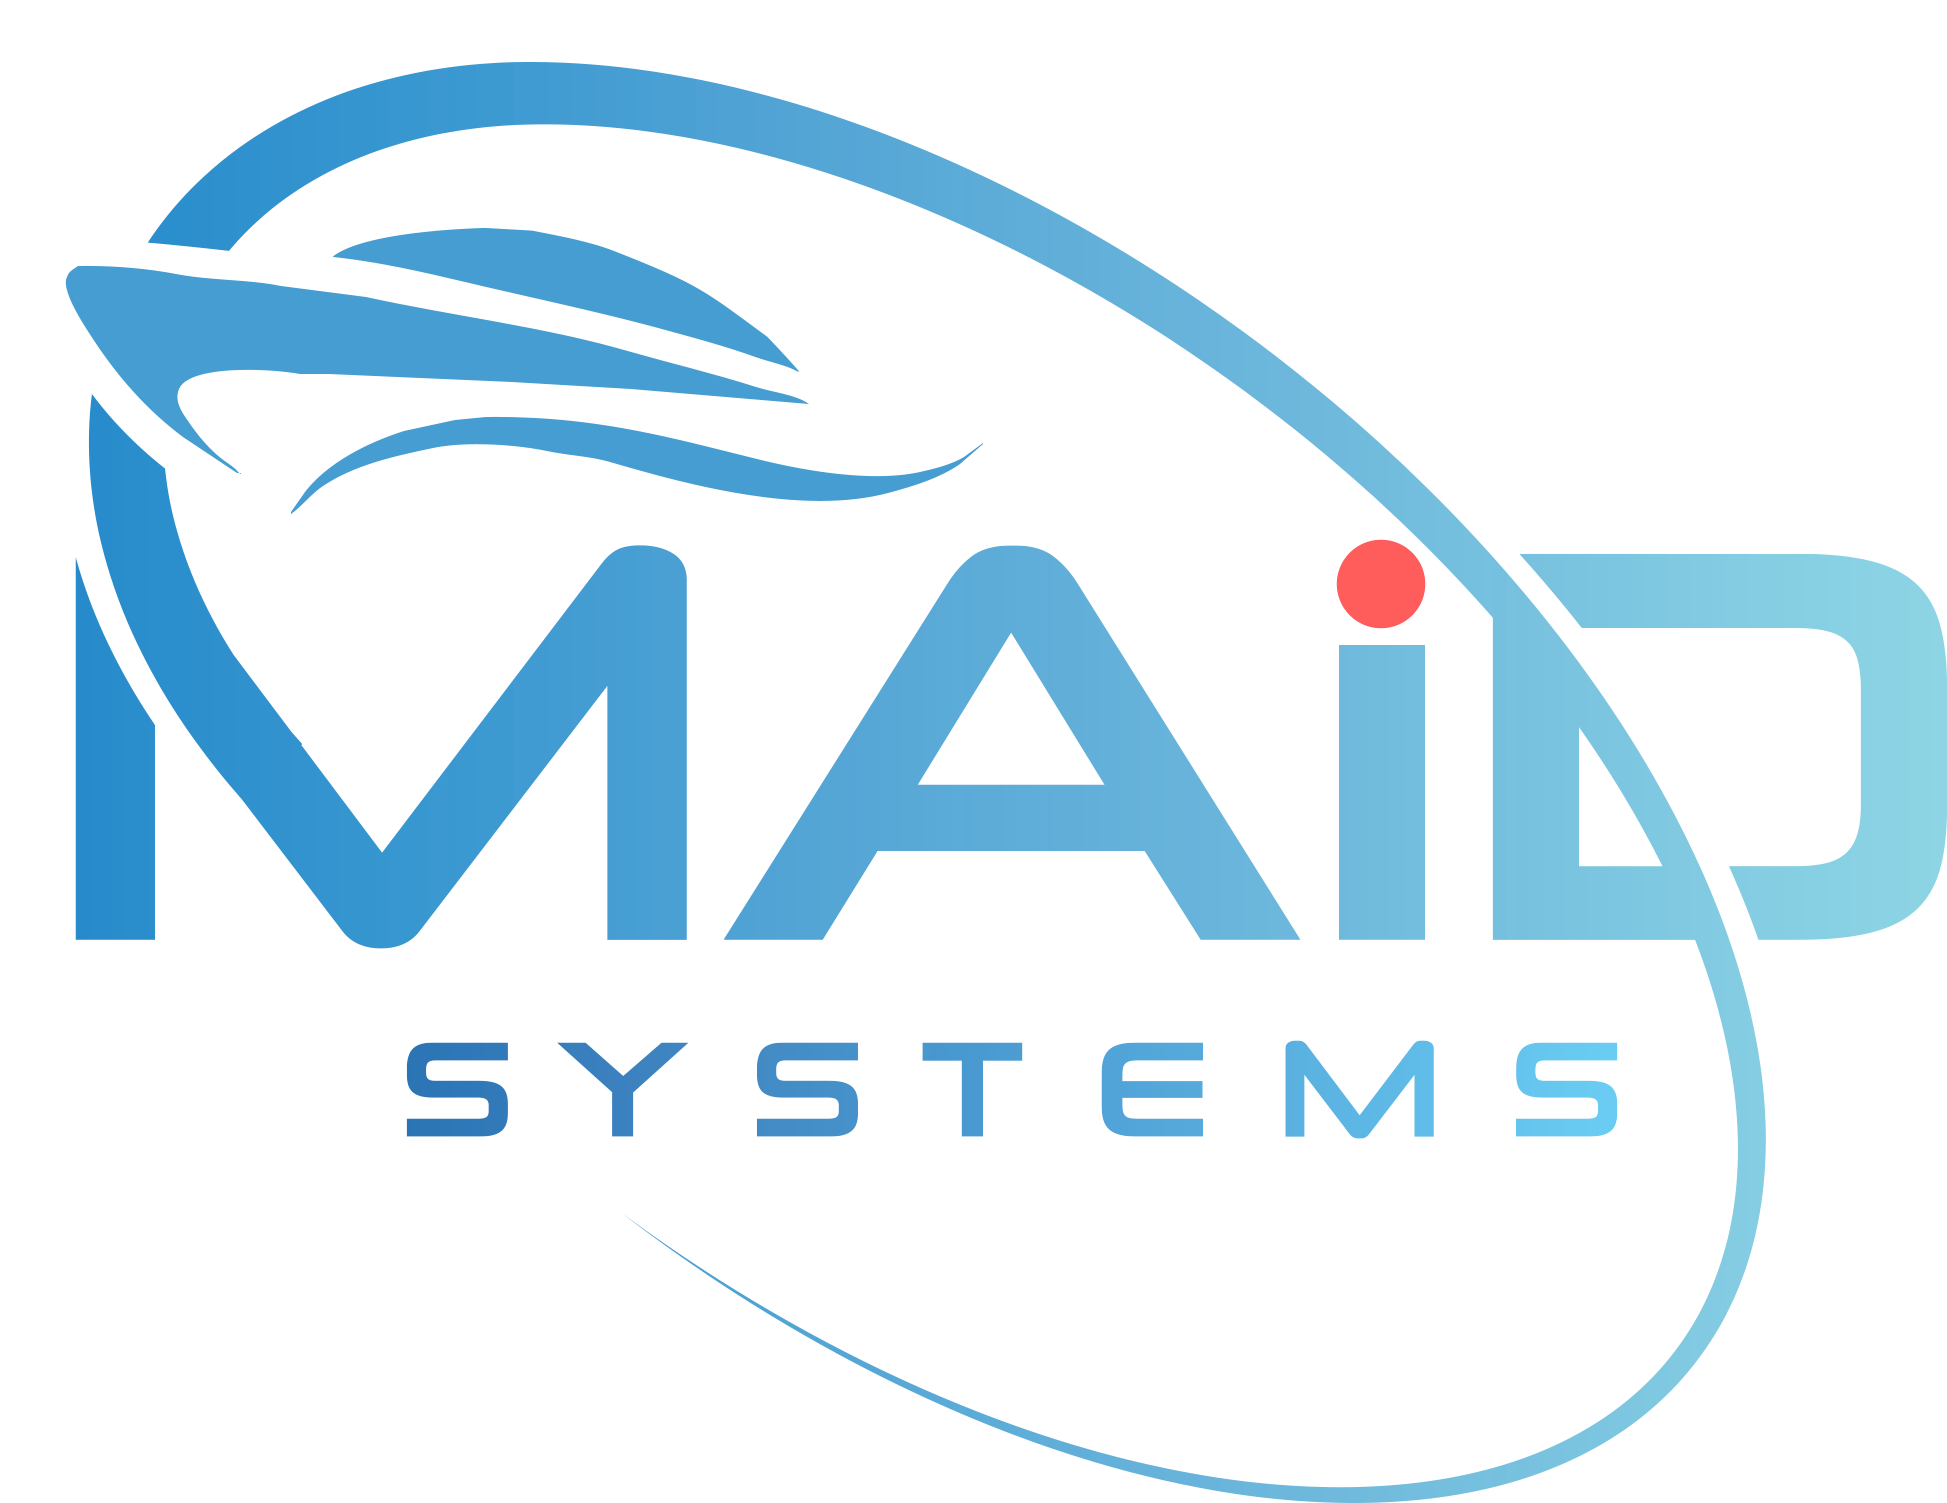 MAID Systems - A Fully Autonomous Docking and Positioning System For Recreational and Commercial Marine Vessels